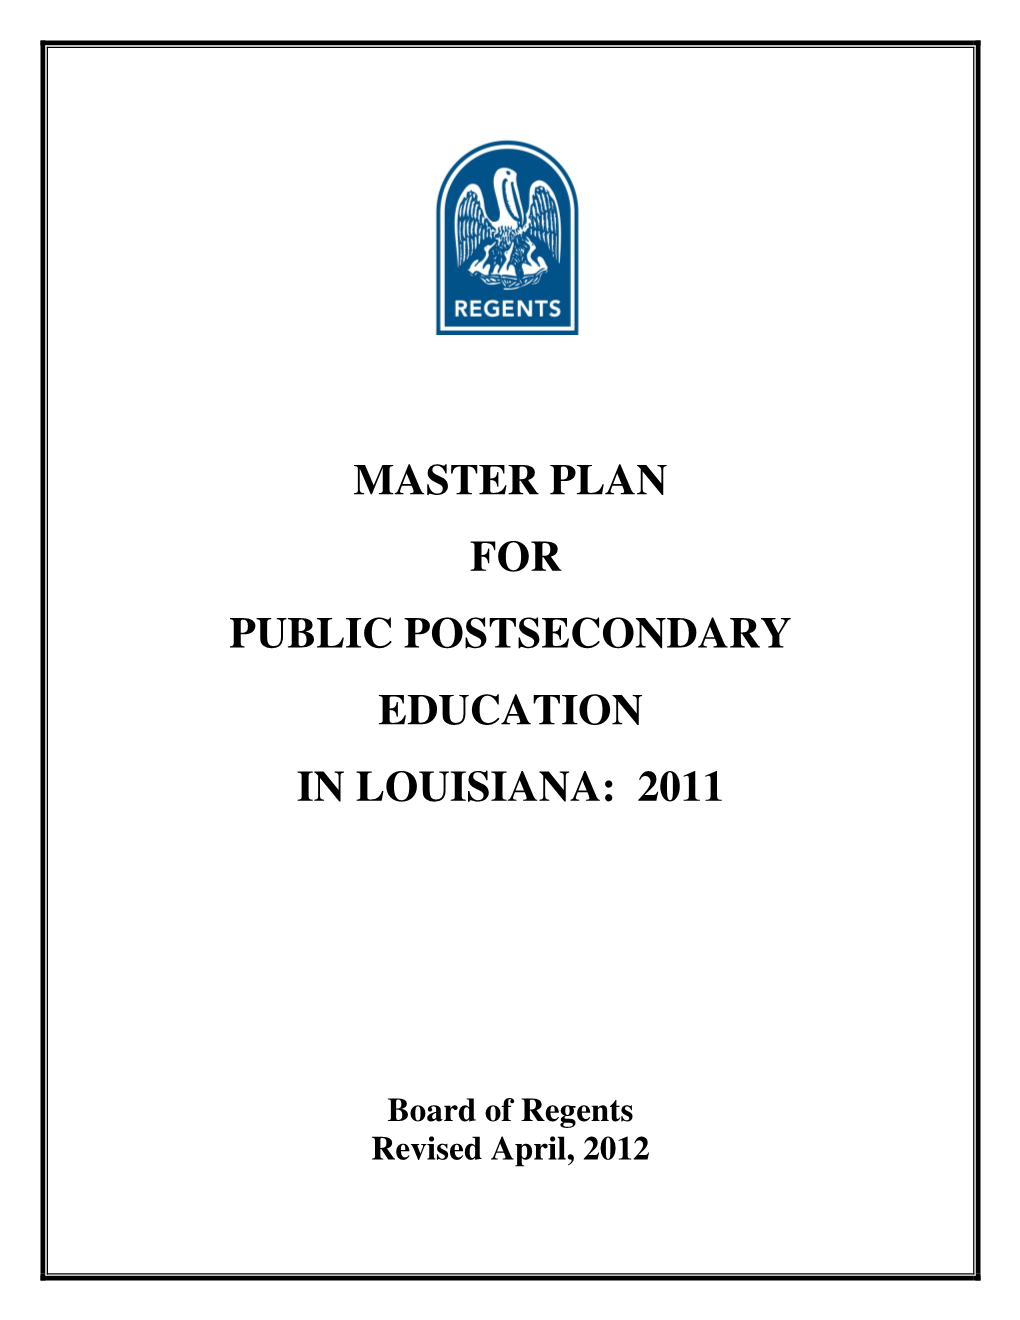 Master Plan for Public Postsecondary Education